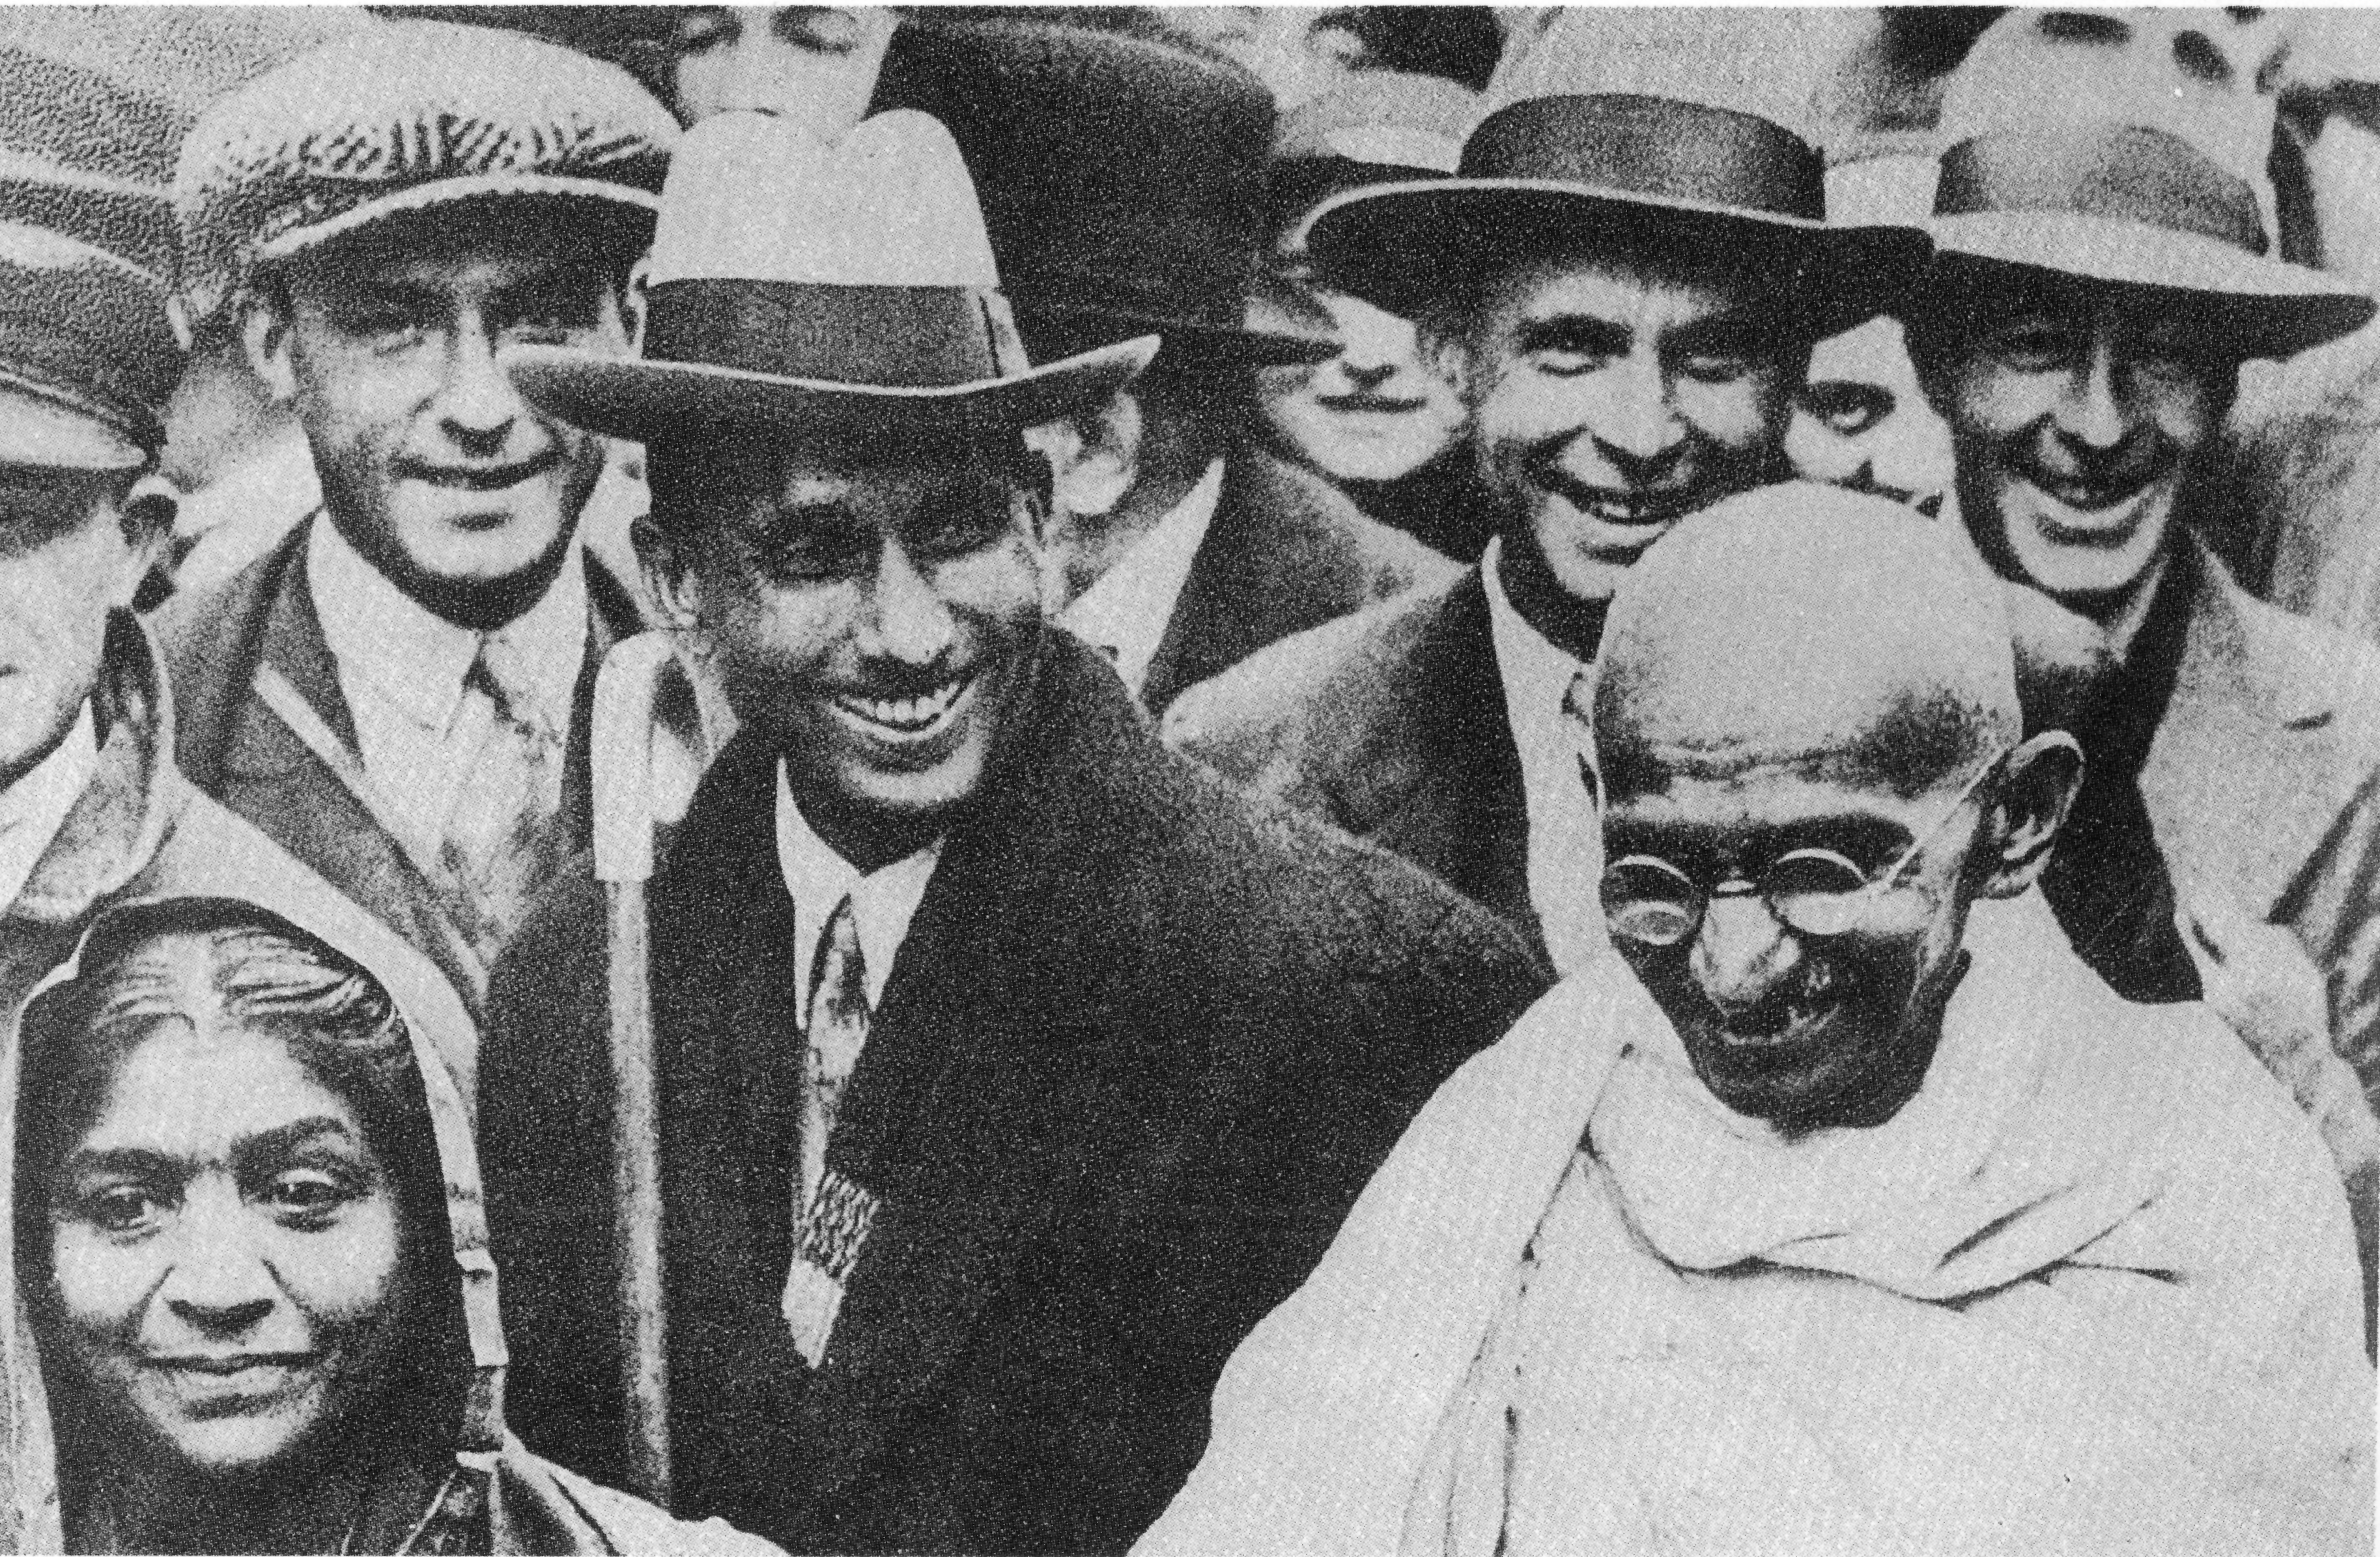 In the first row, Mahatma Gandhi is seen with Shri G. D. Birla (Past President, FICCI) and Smt Sarojini Naidu on their way to London to attend the Second Round Table Conference.